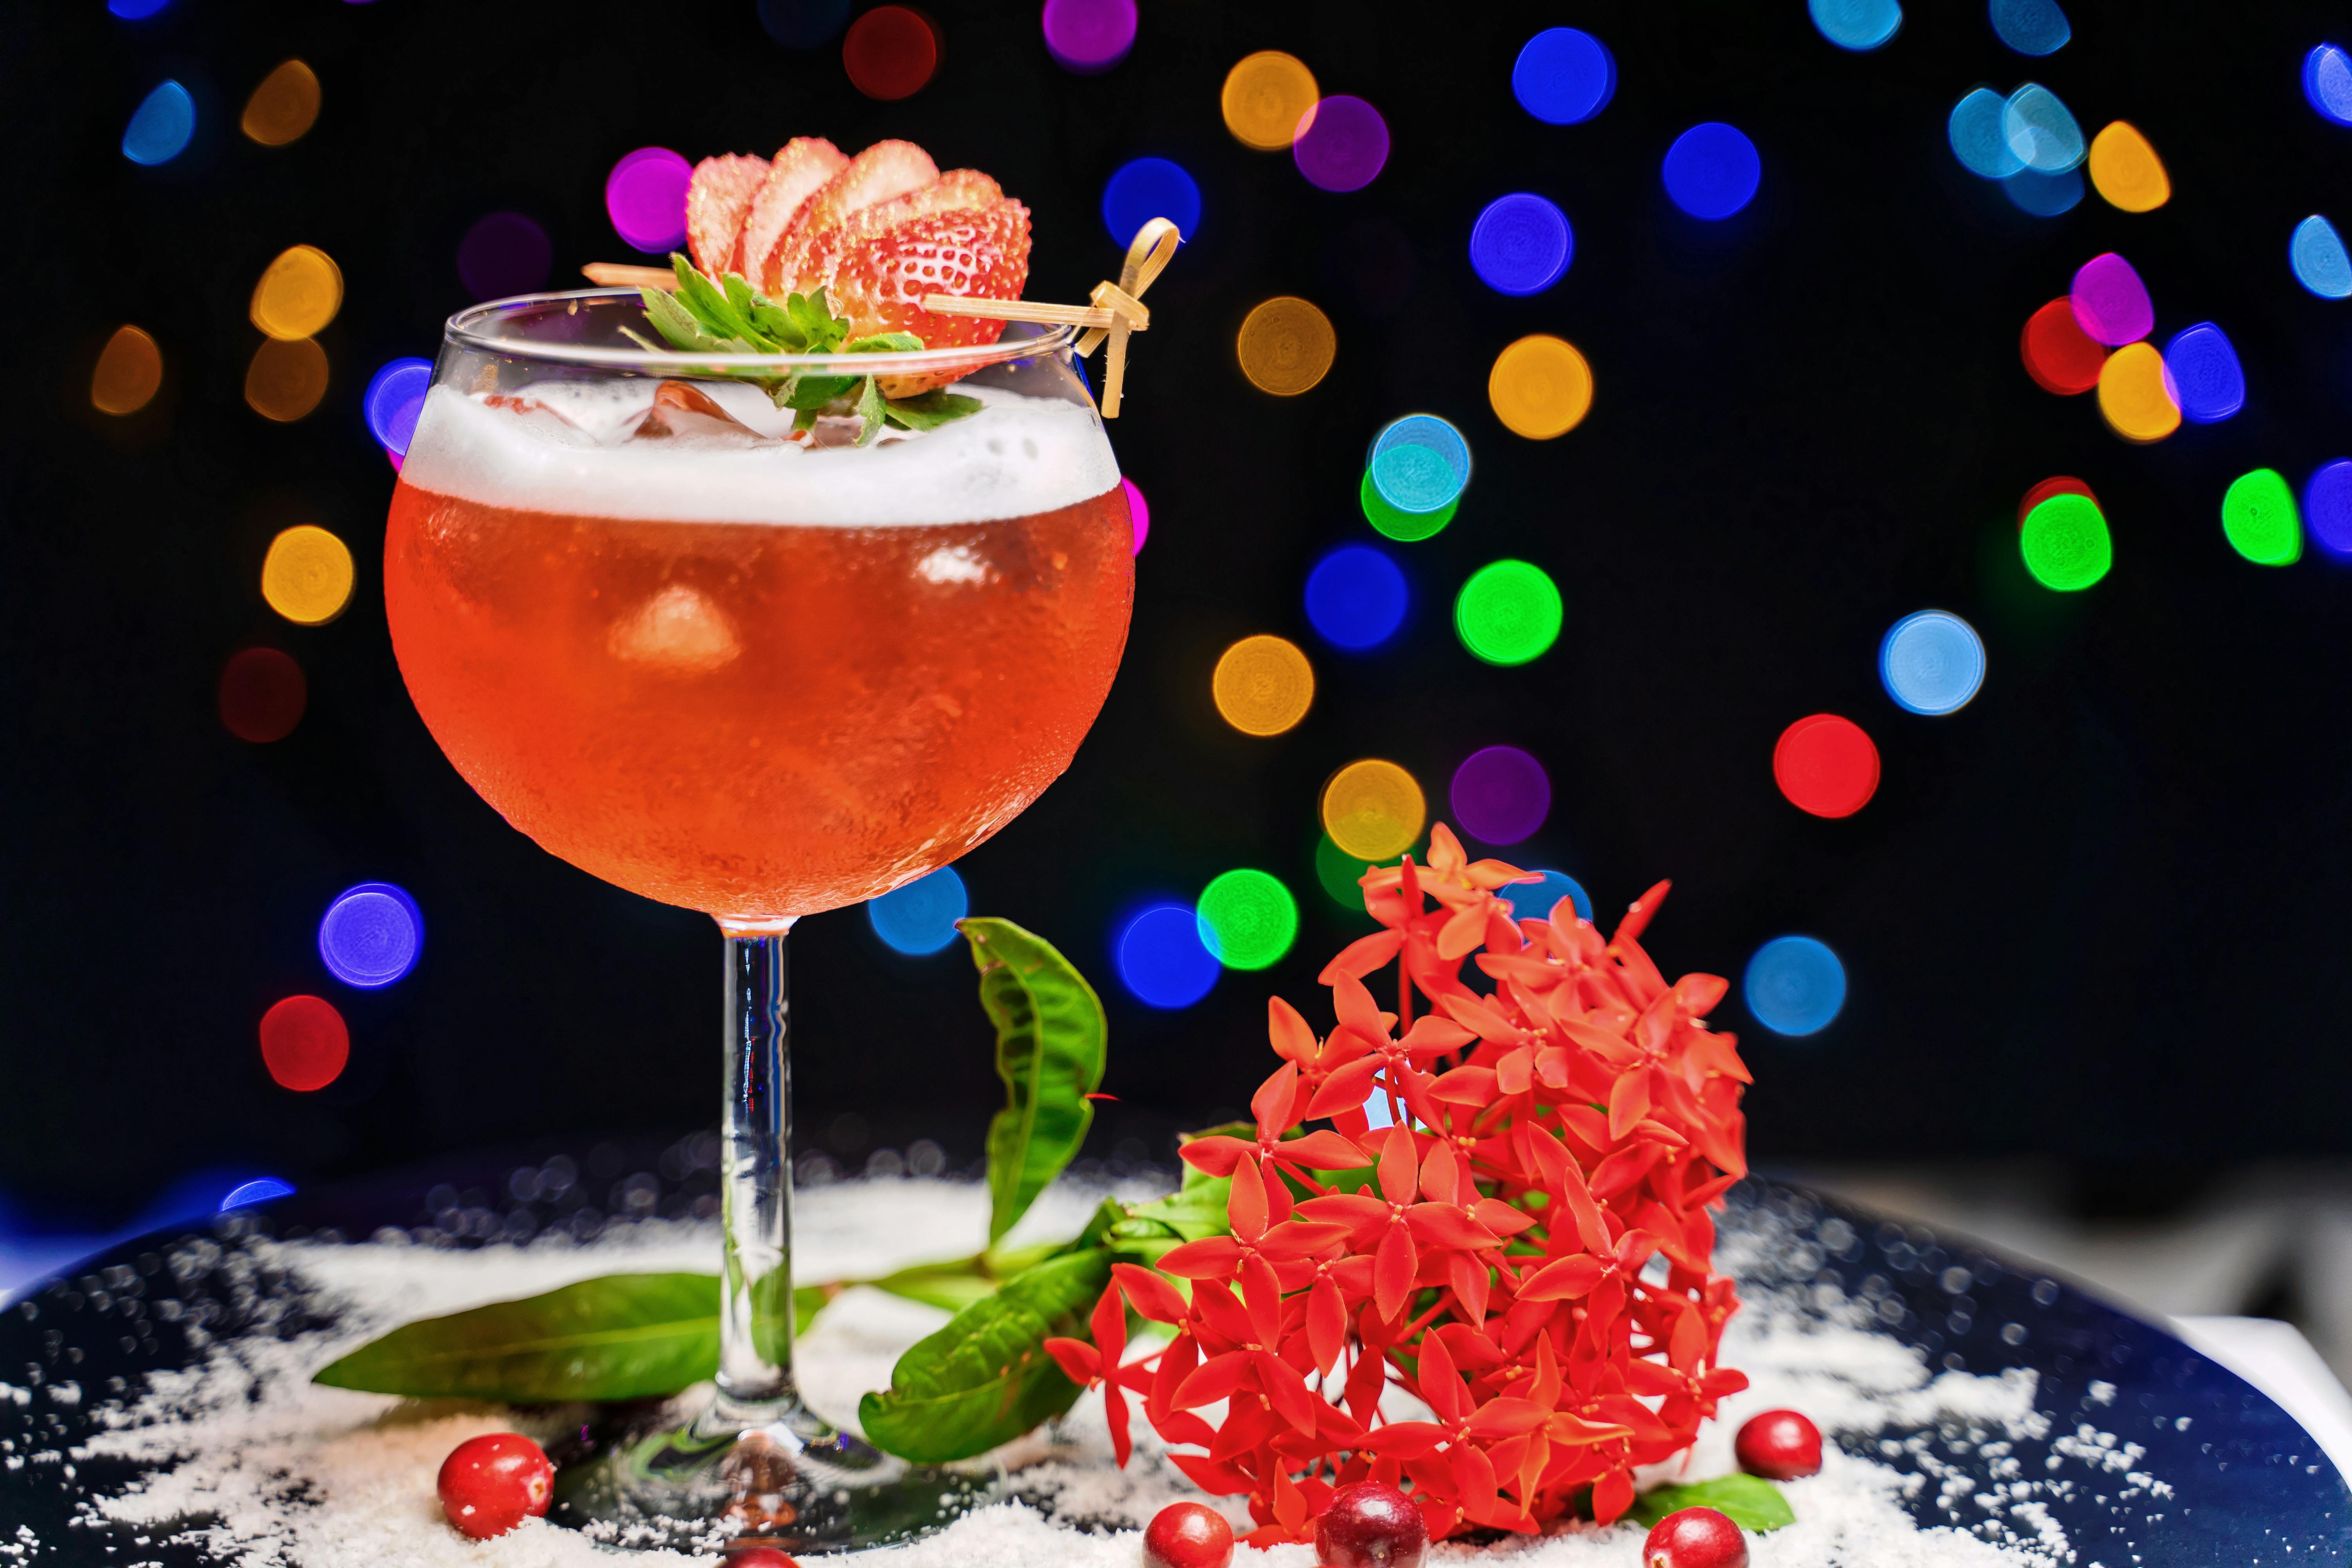 strawberry cocktail on plate decorated with red flo